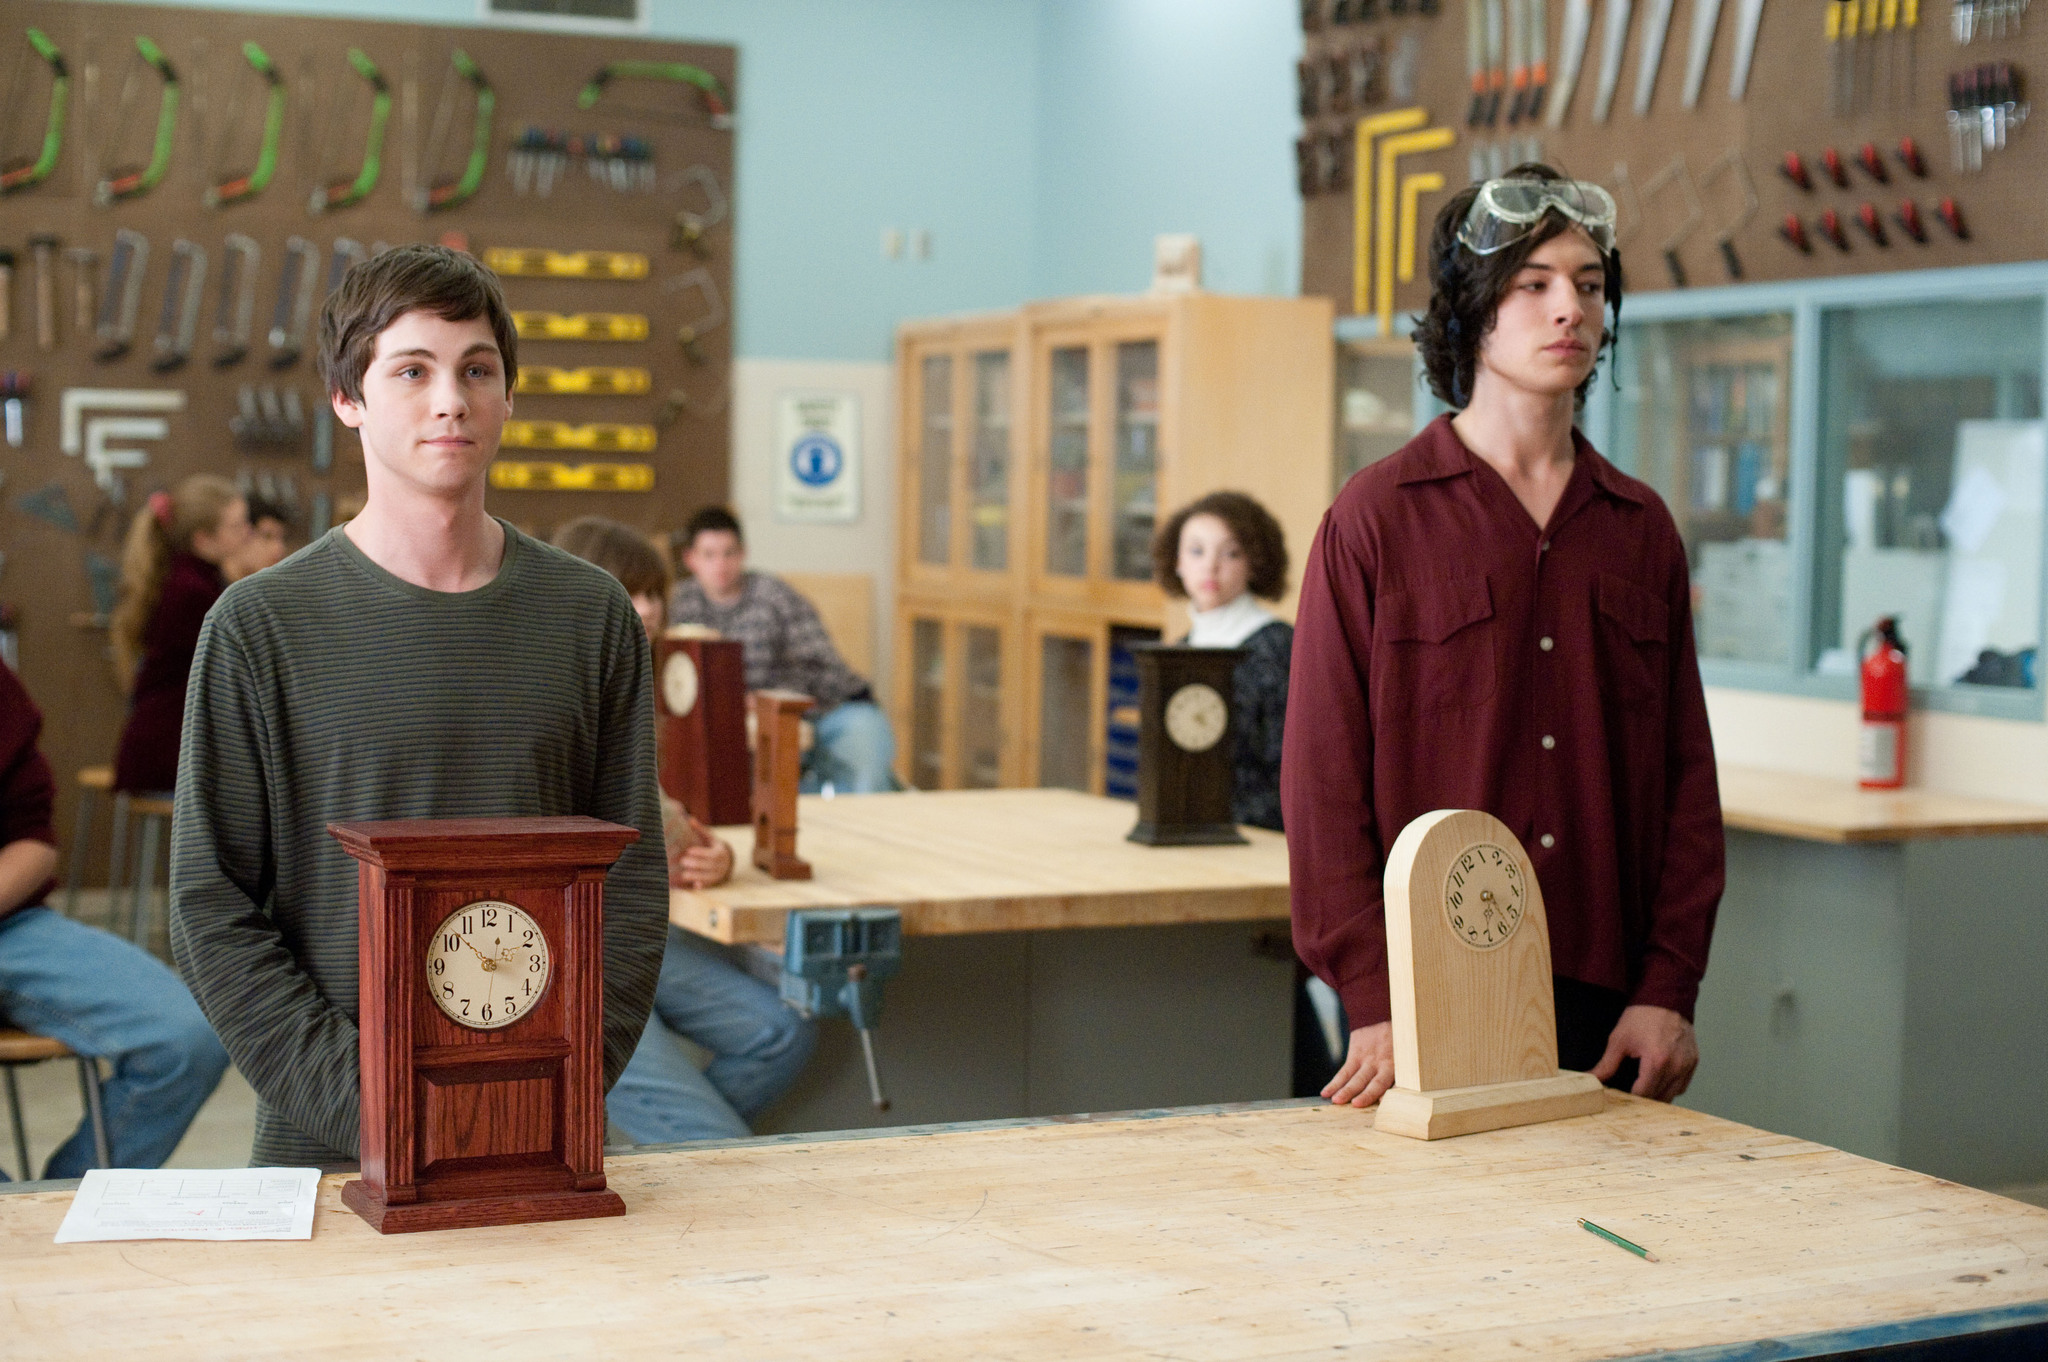 Still of Logan Lerman and Ezra Miller in The Perks of Being a Wallflower (2012)